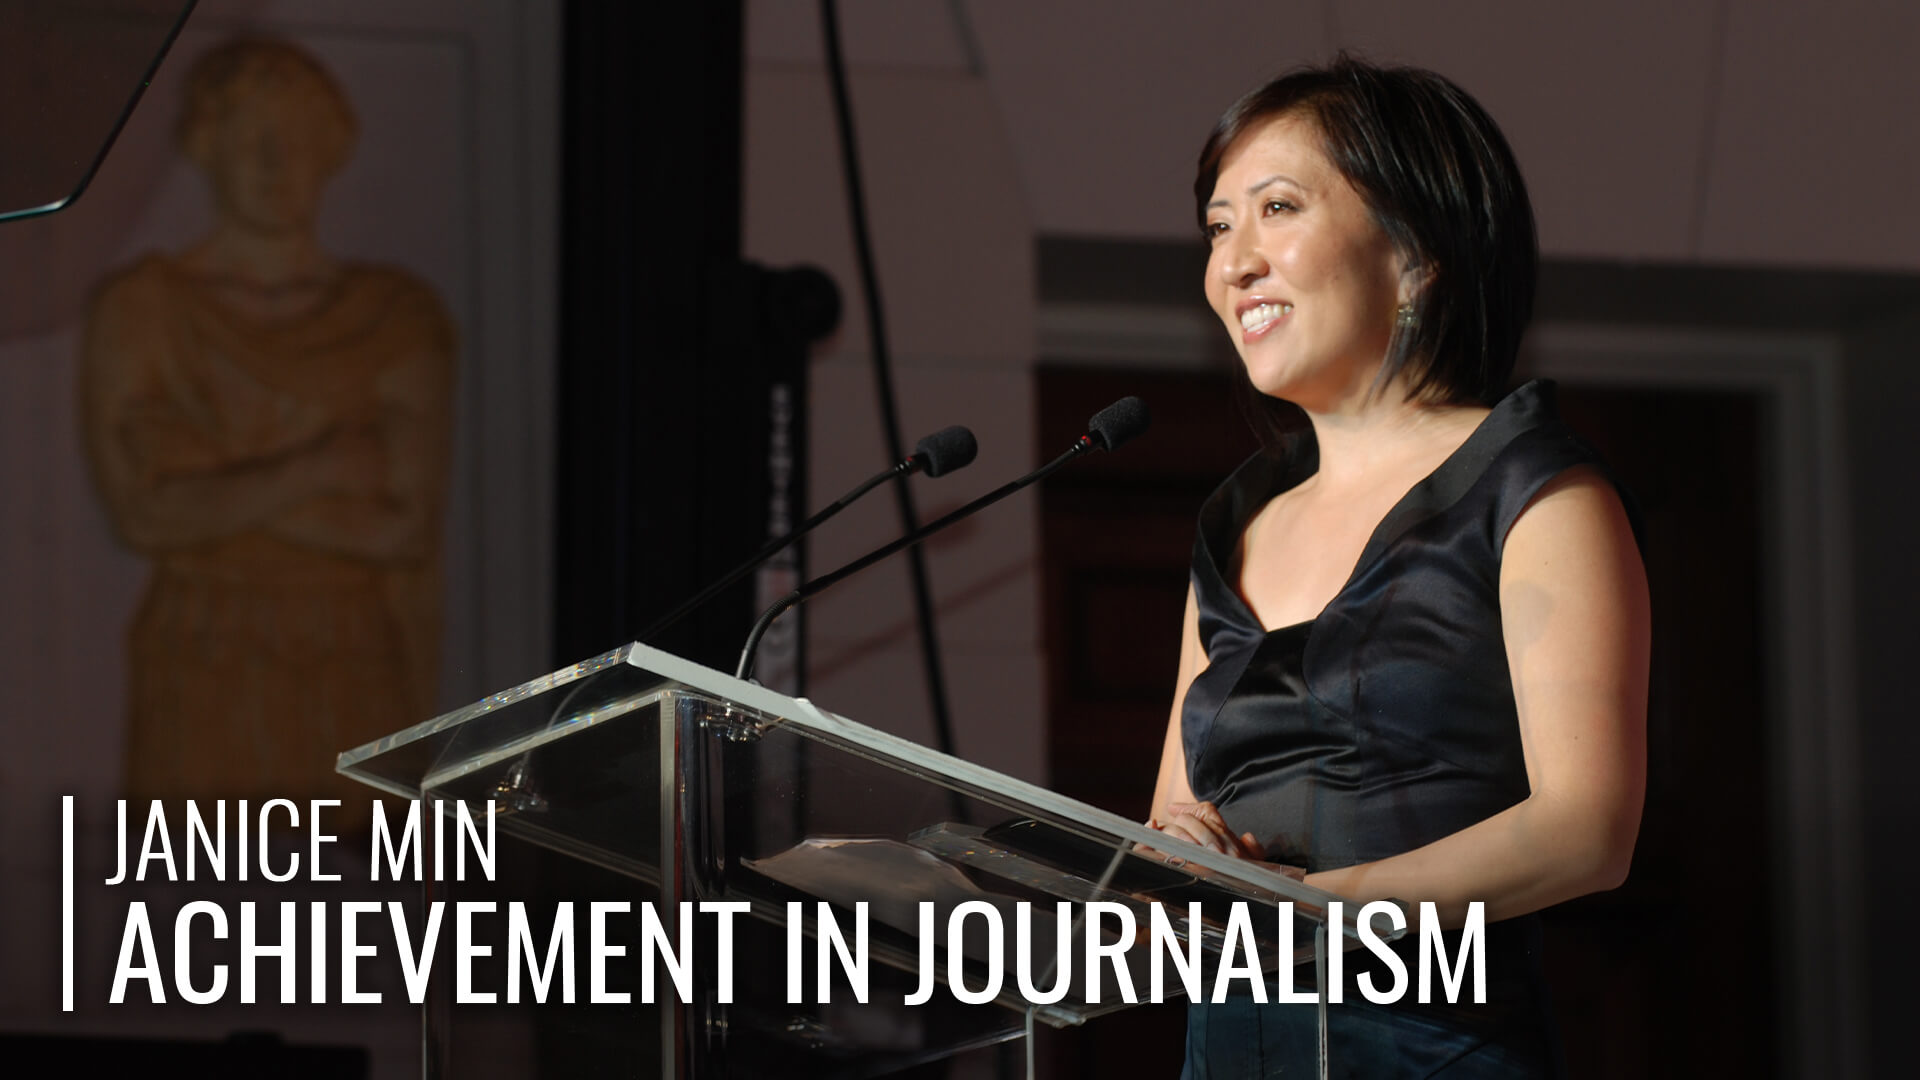 Janice Min Wins Achievement in Journalism at the 2009 Unforgettable Gala